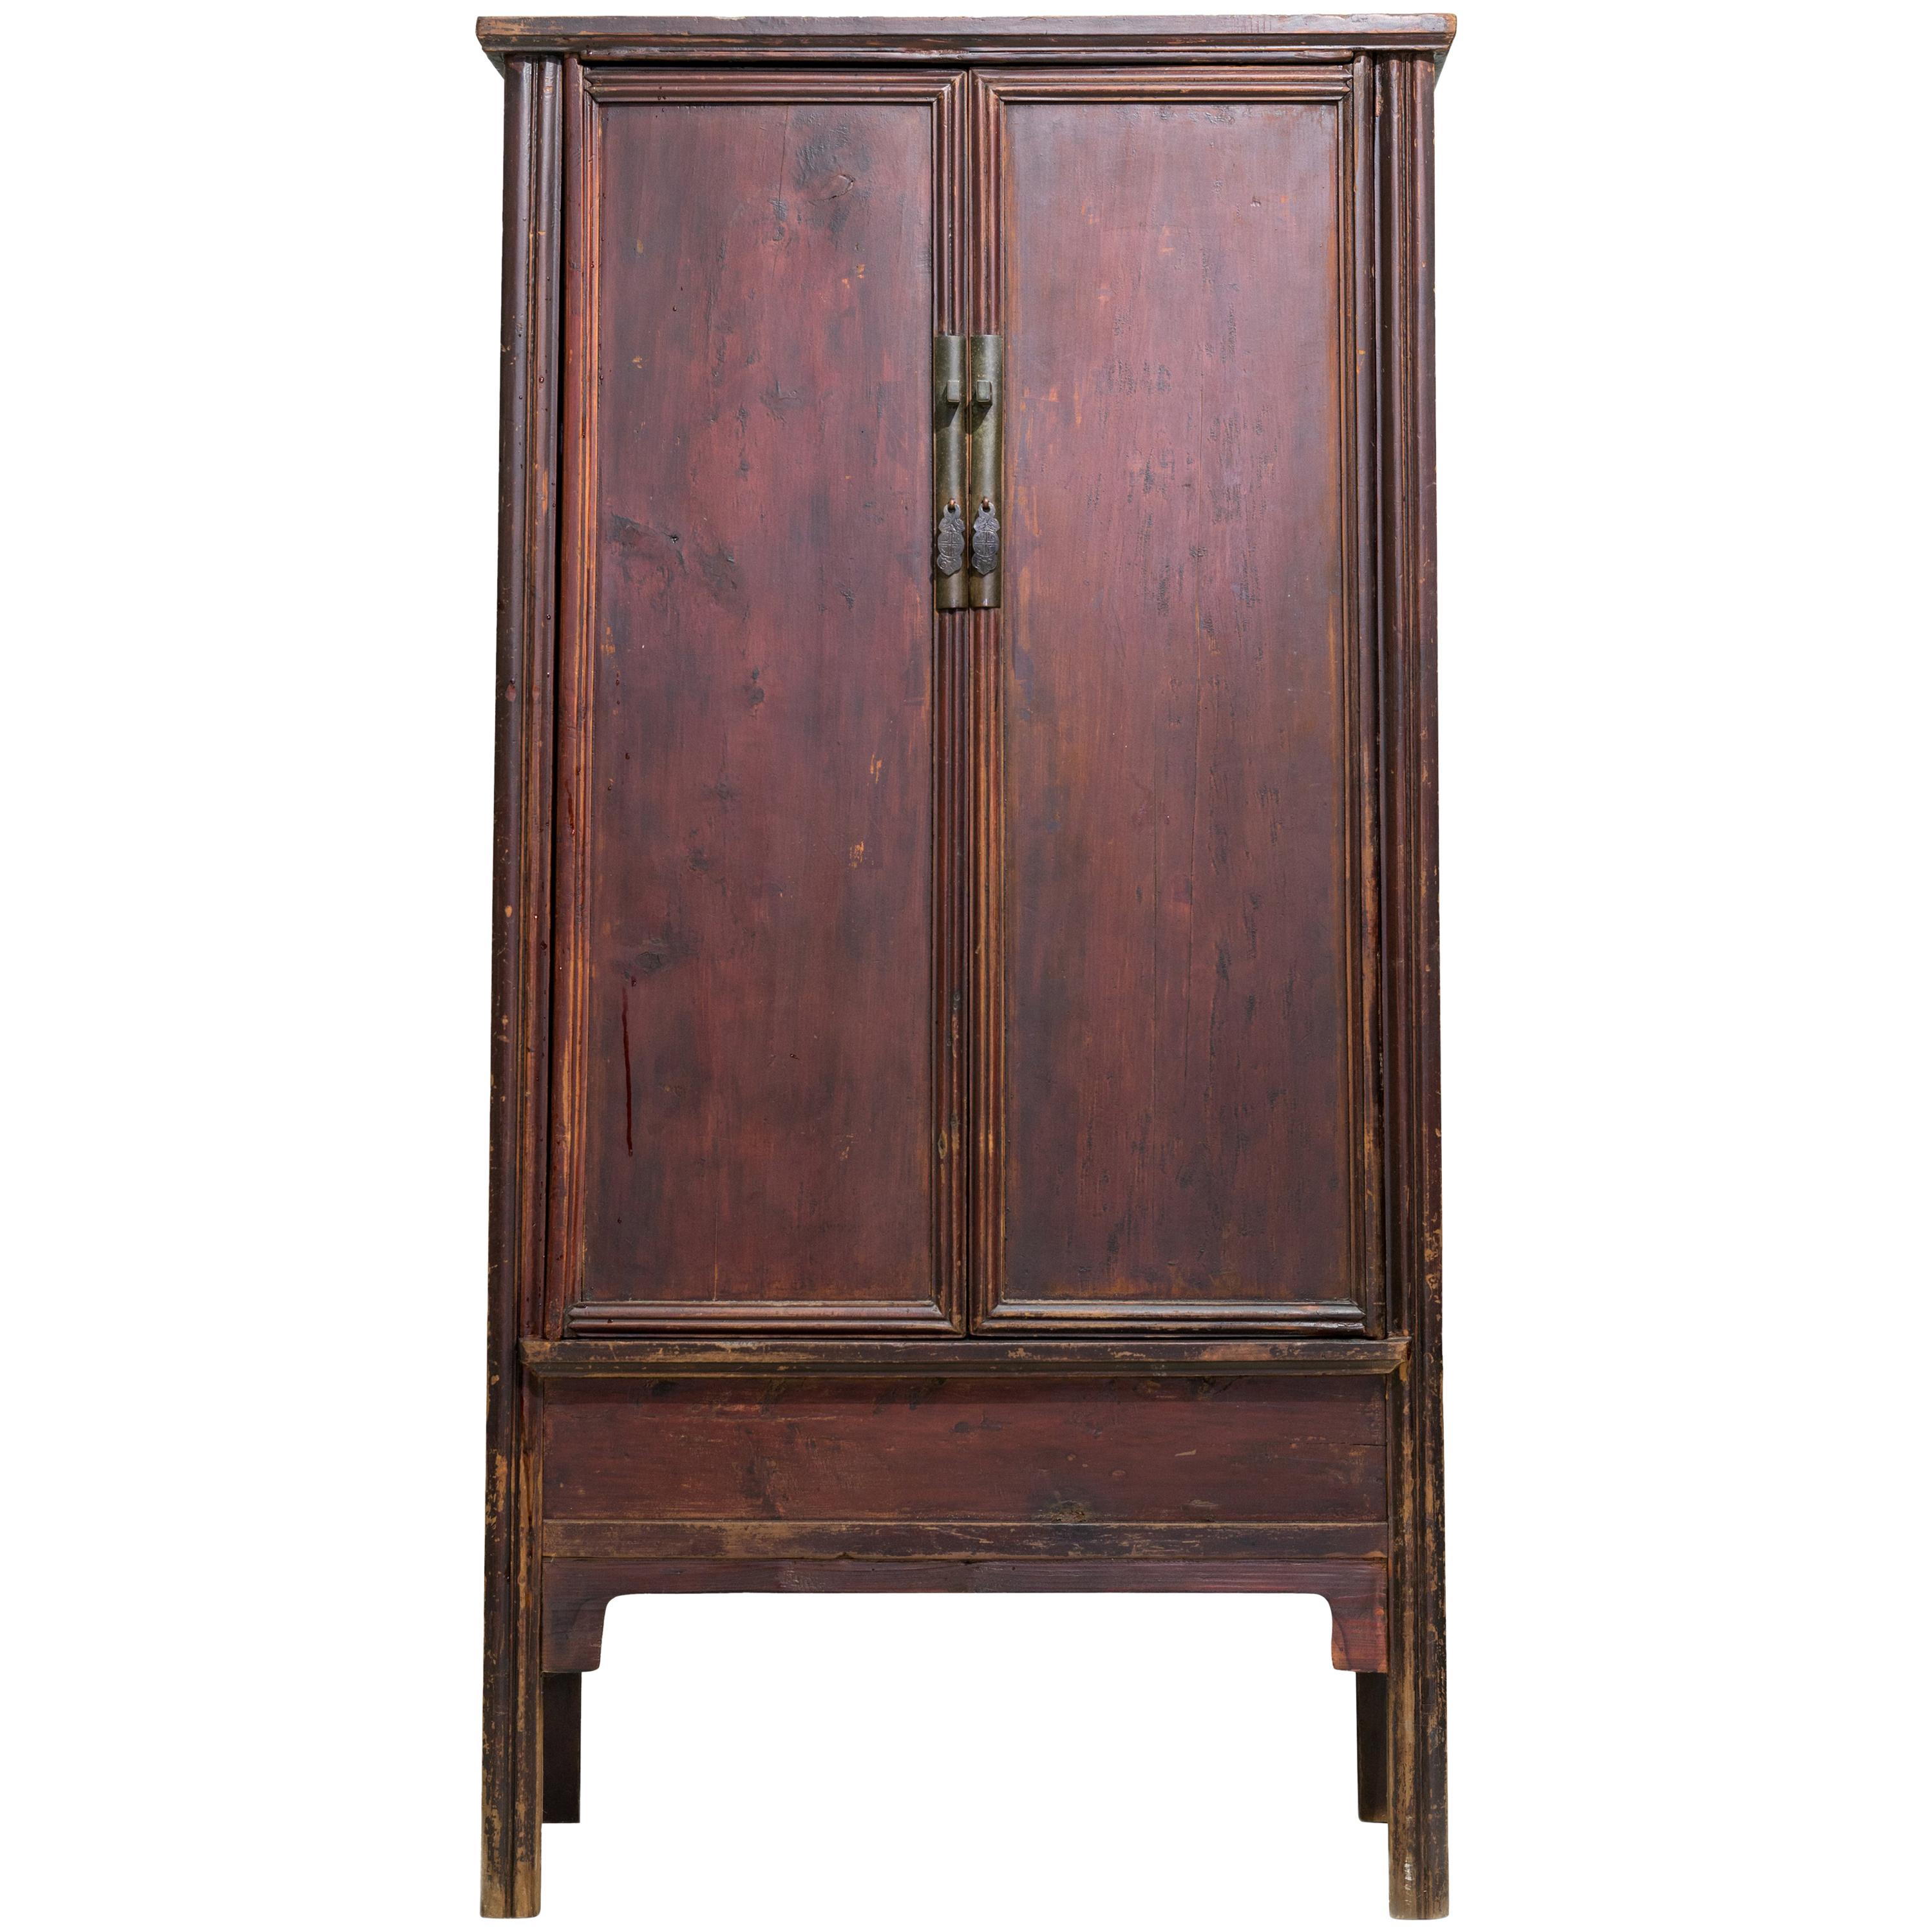 Early 20th Century Sloping-Stile Wood-Hinged Cabinet